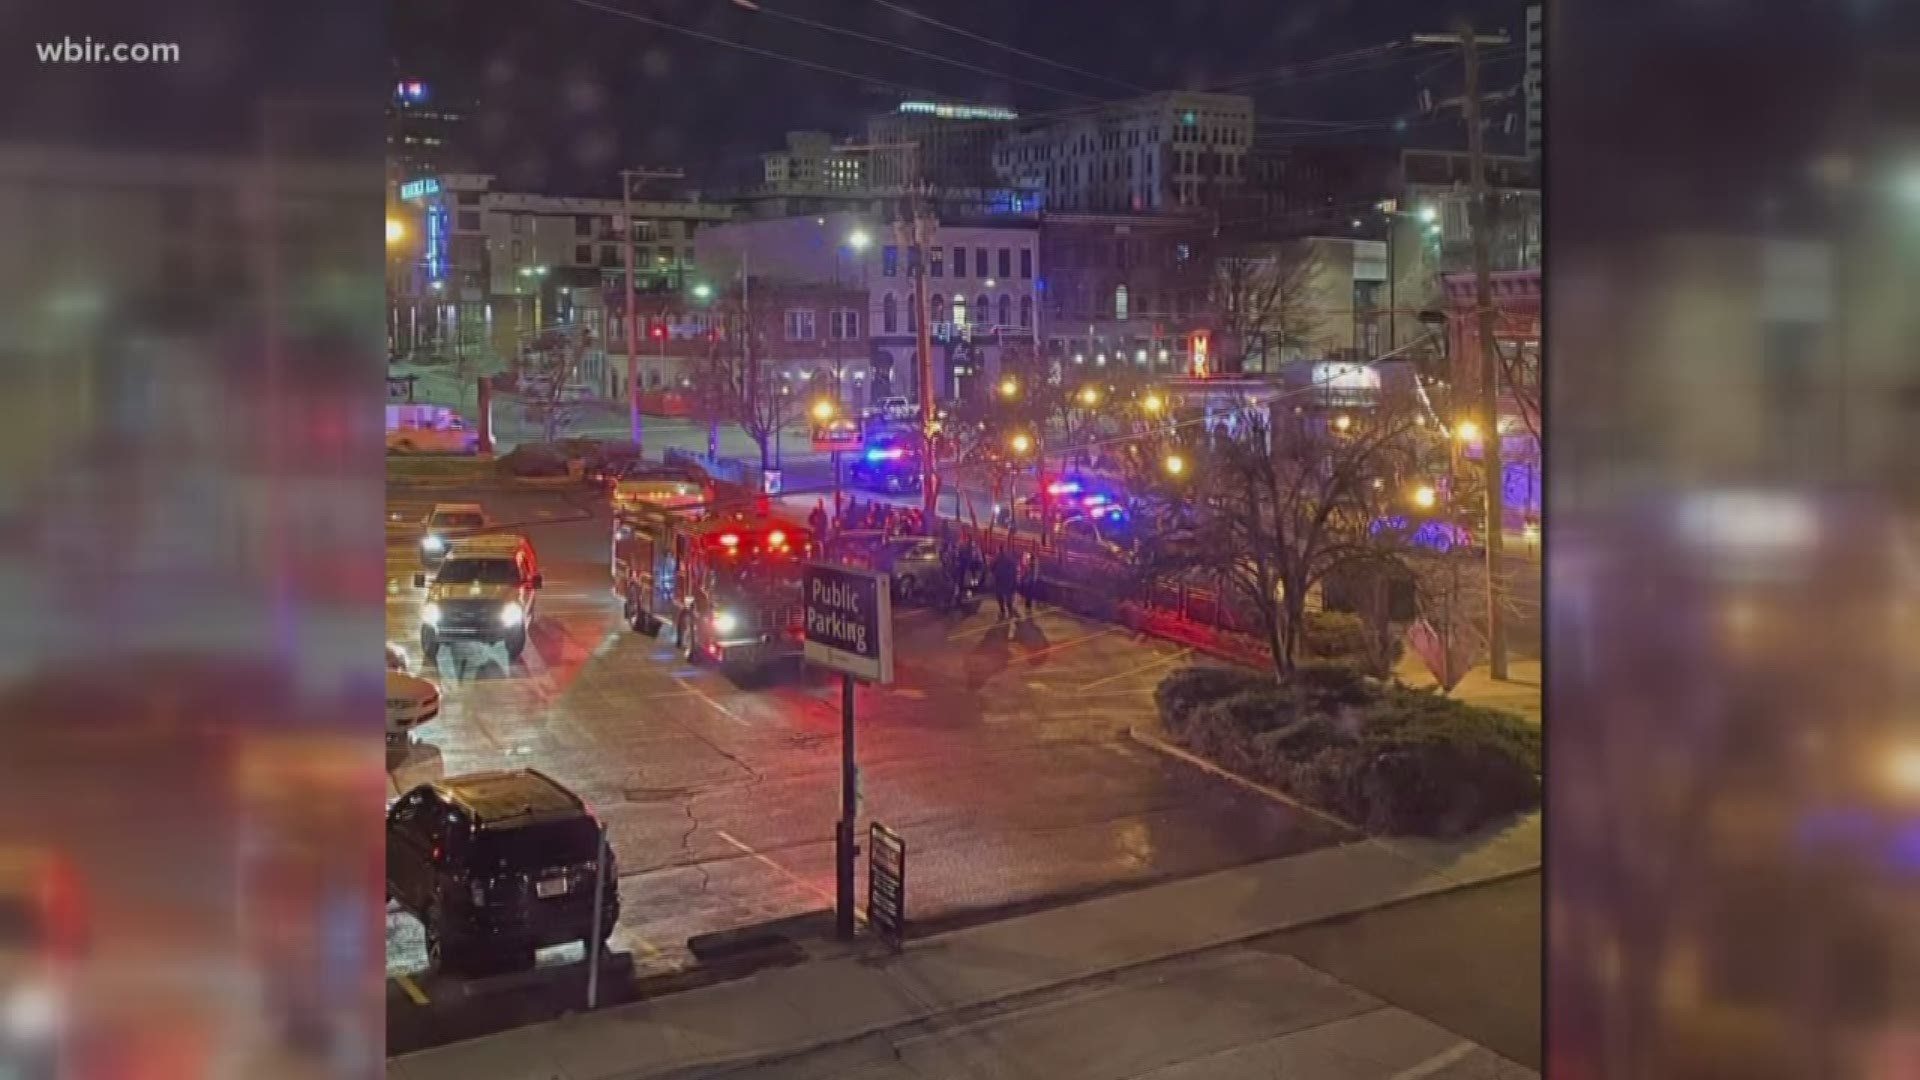 Knoxville police are still looking for a suspect who injured four people after an early morning hit-and-run downtown.